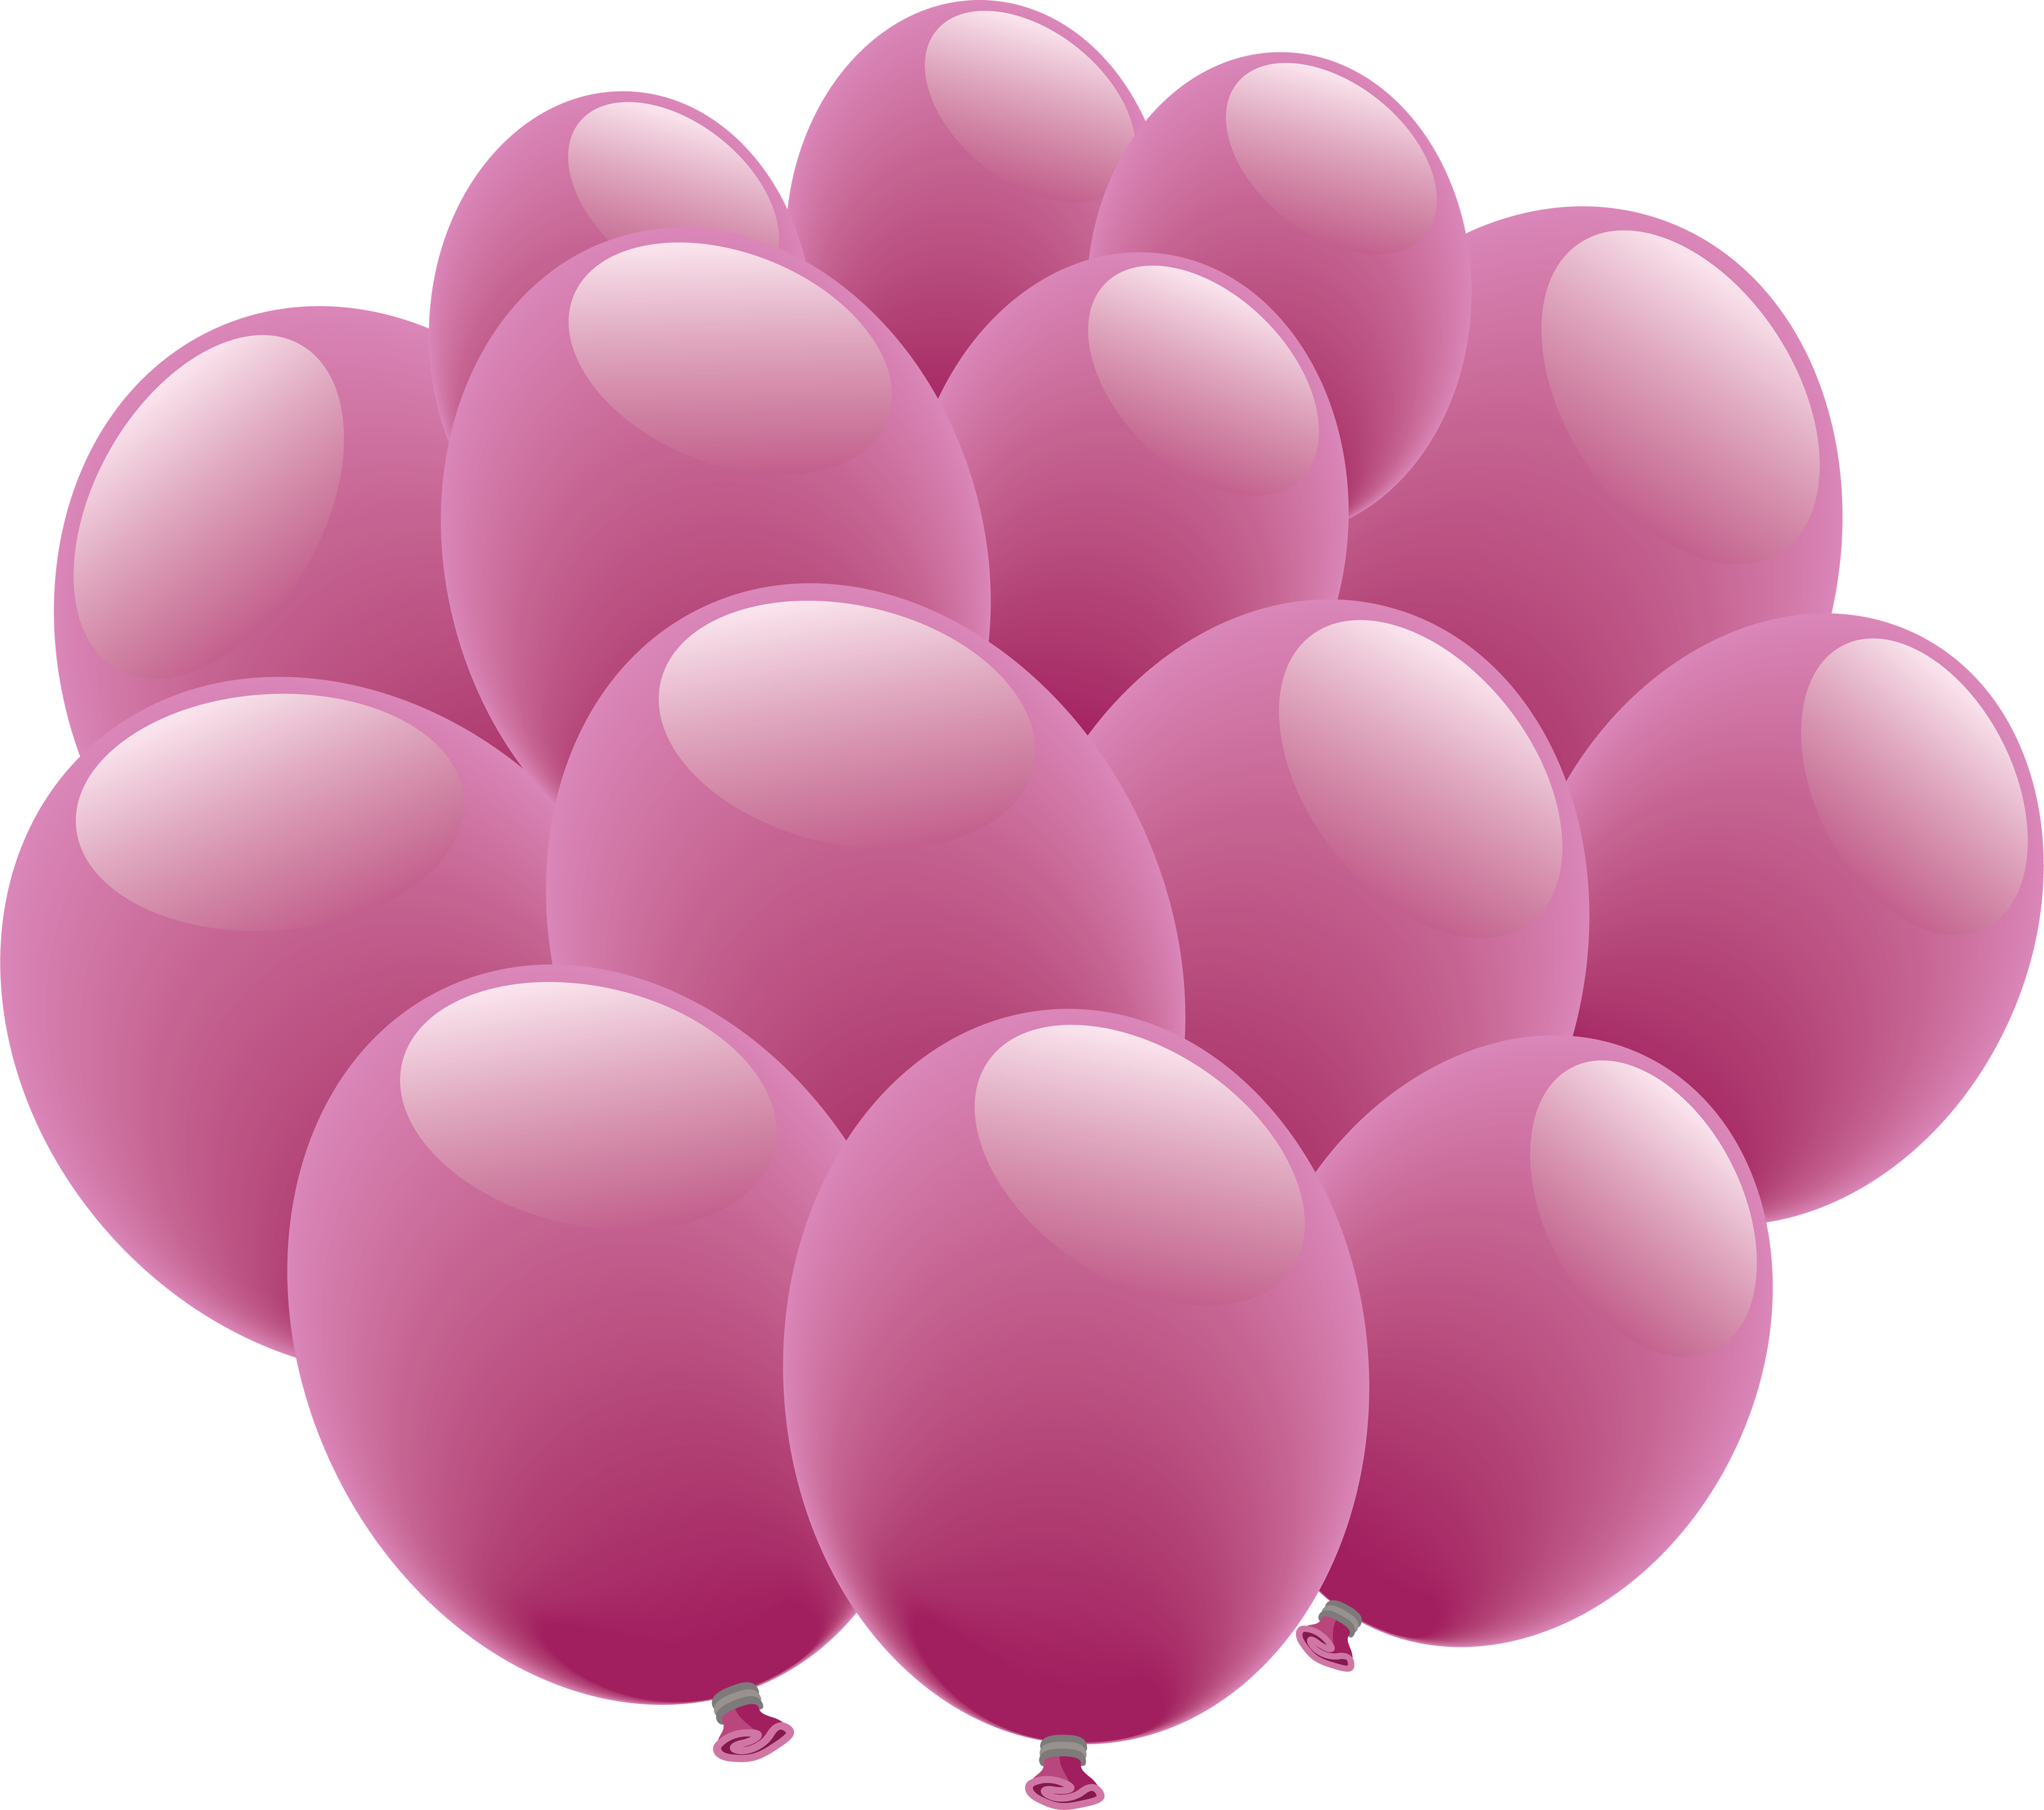 Pink Bunch of Balloons PNG Photos